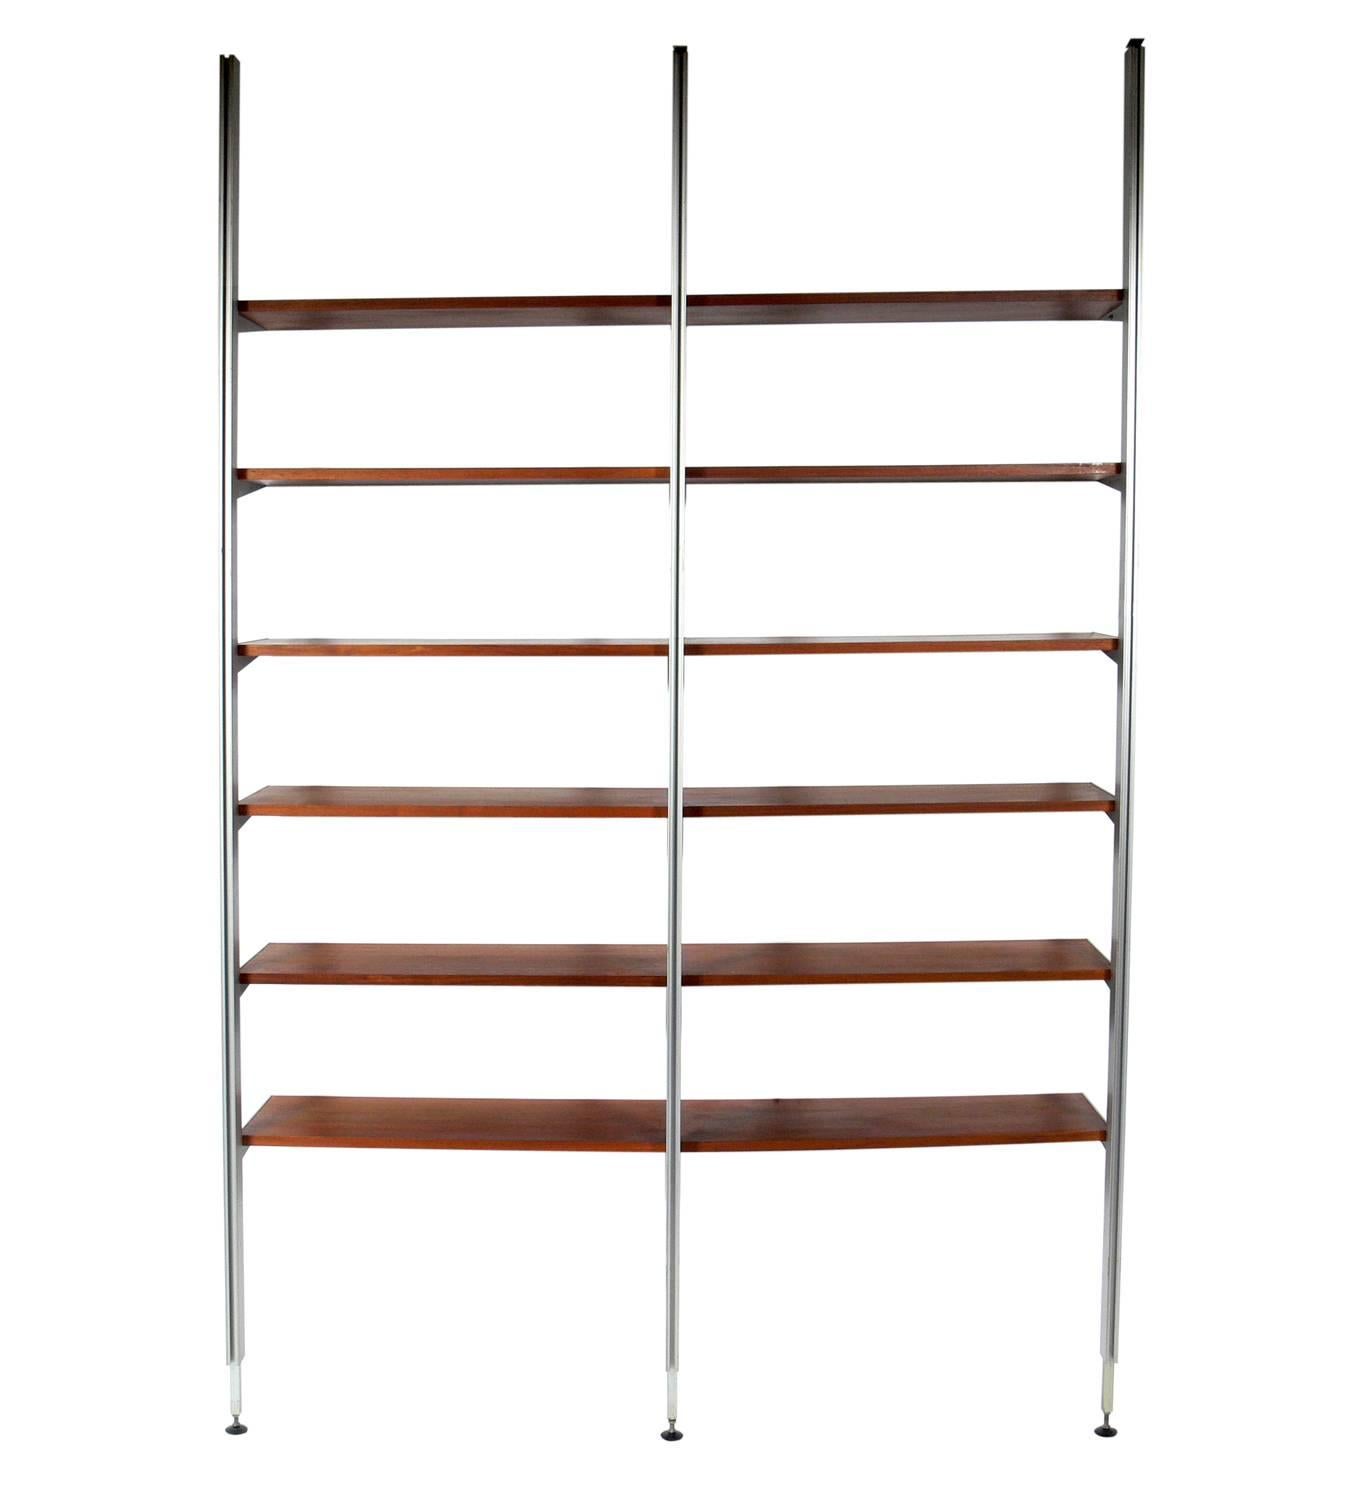 George Nelson for Herman Miller CSS Bookshelf Unit, American, circa 1950s. This unit contains three uprights for two bays and a total of twelve shelves, which can be configured anywhere you like up and down the uprights. Perfect as a stand alone